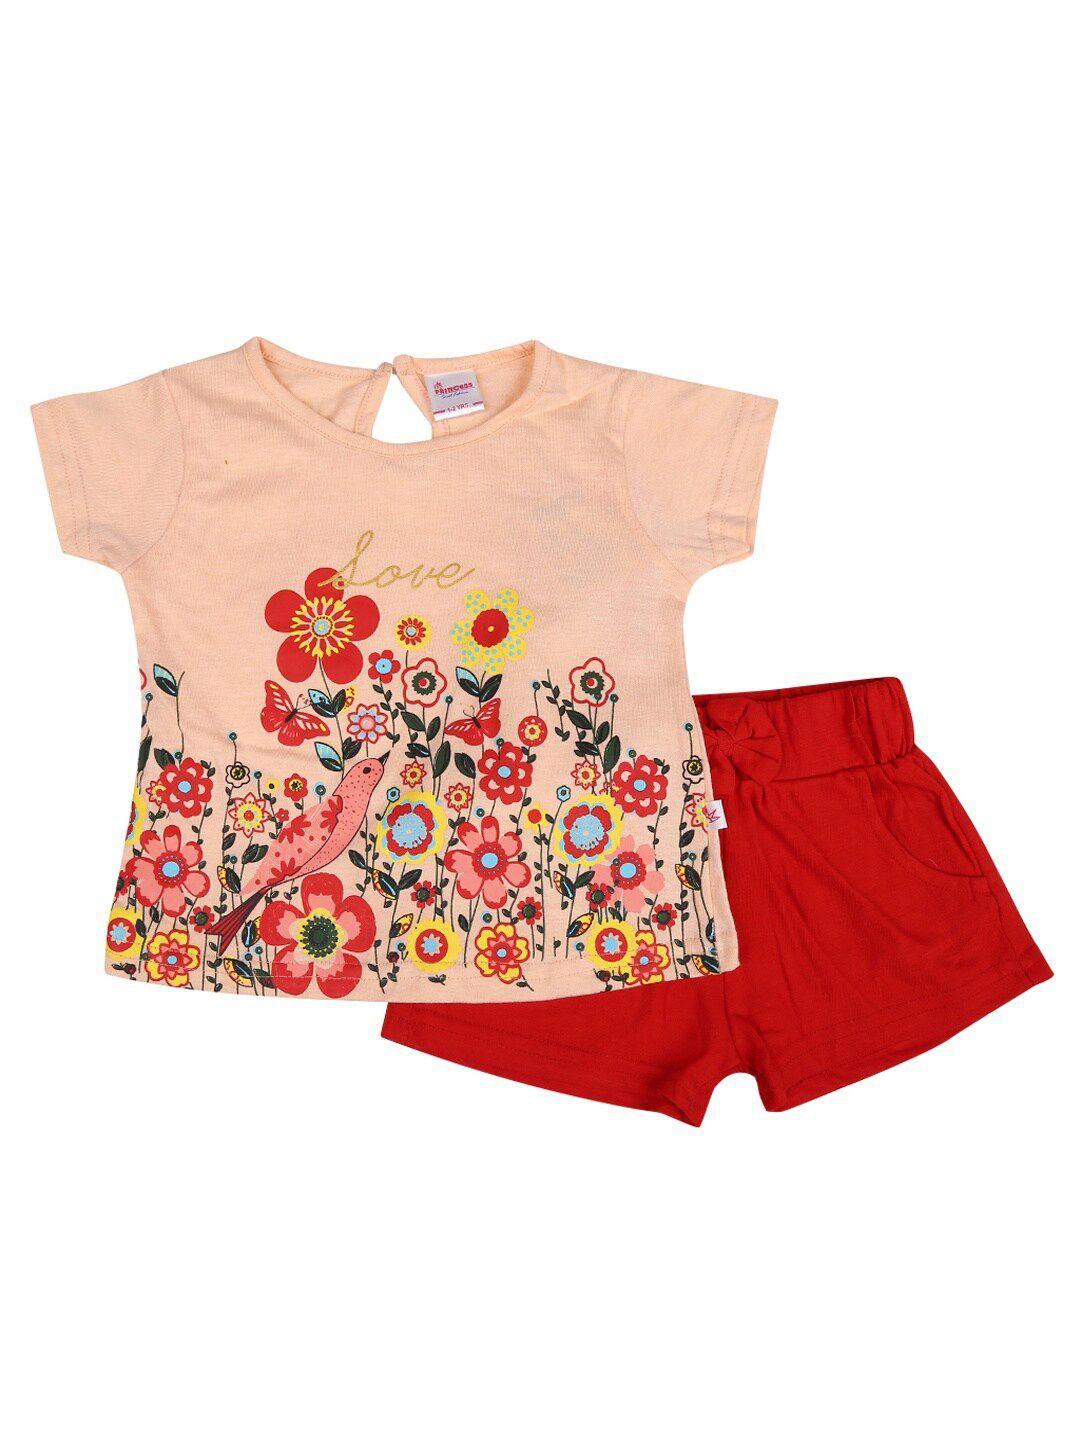 v-mart unisex kids peach-coloured & red printed top with shorts